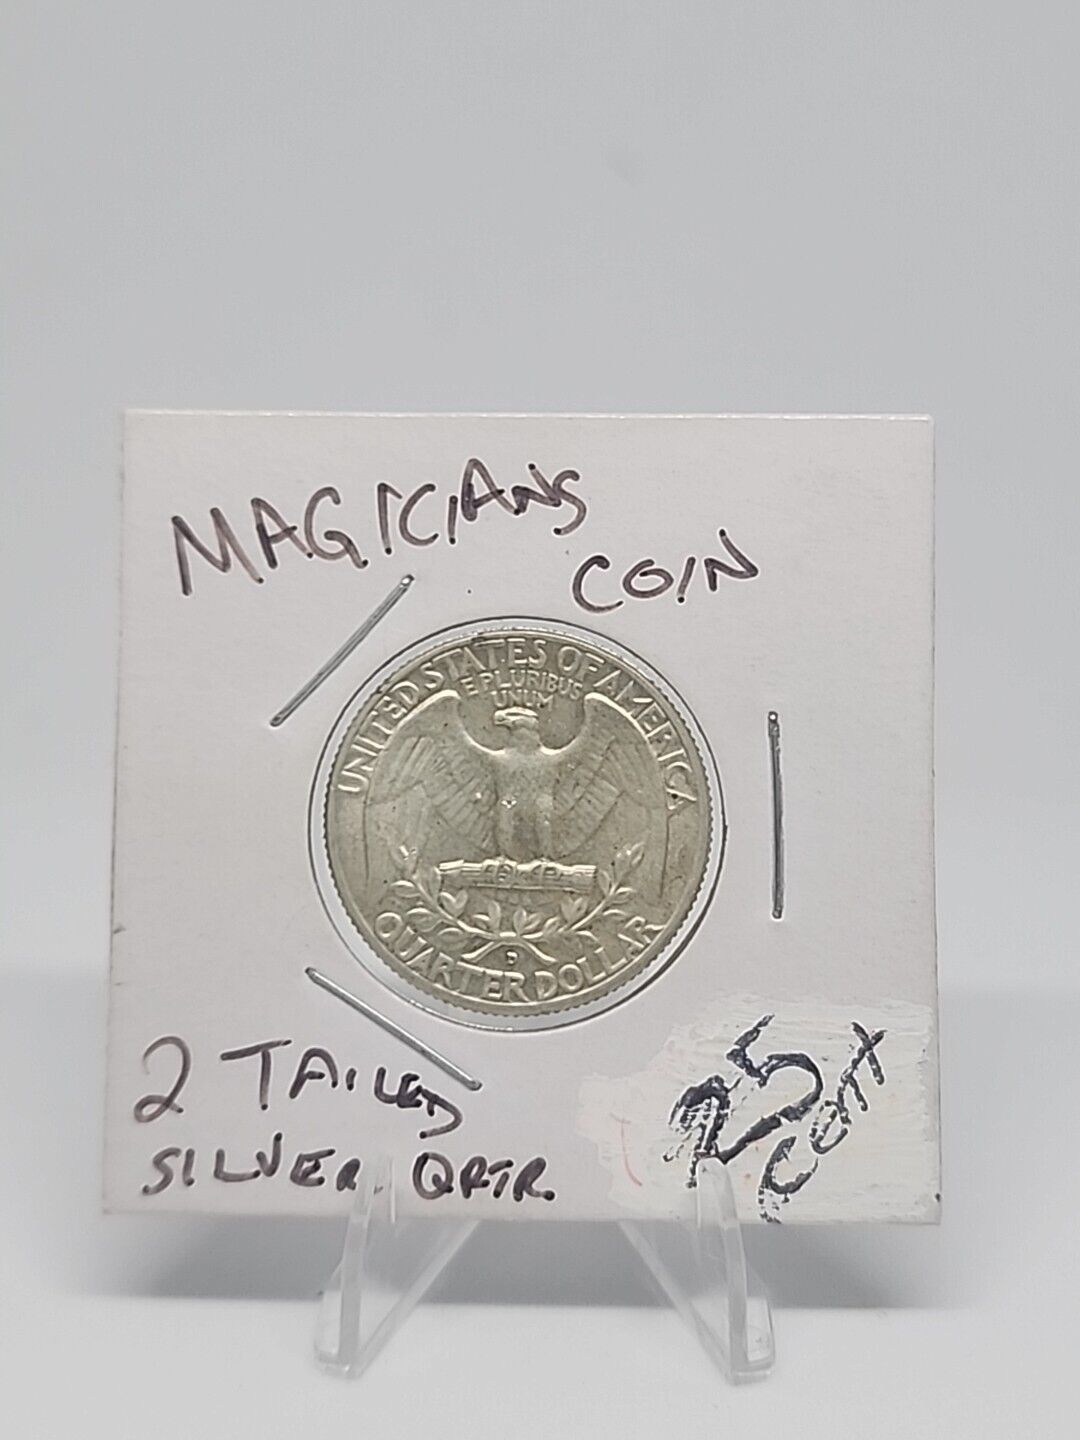 Two Sided Trick Coin - Silver  Tails Quarter - Two Face - Double Tails Coin